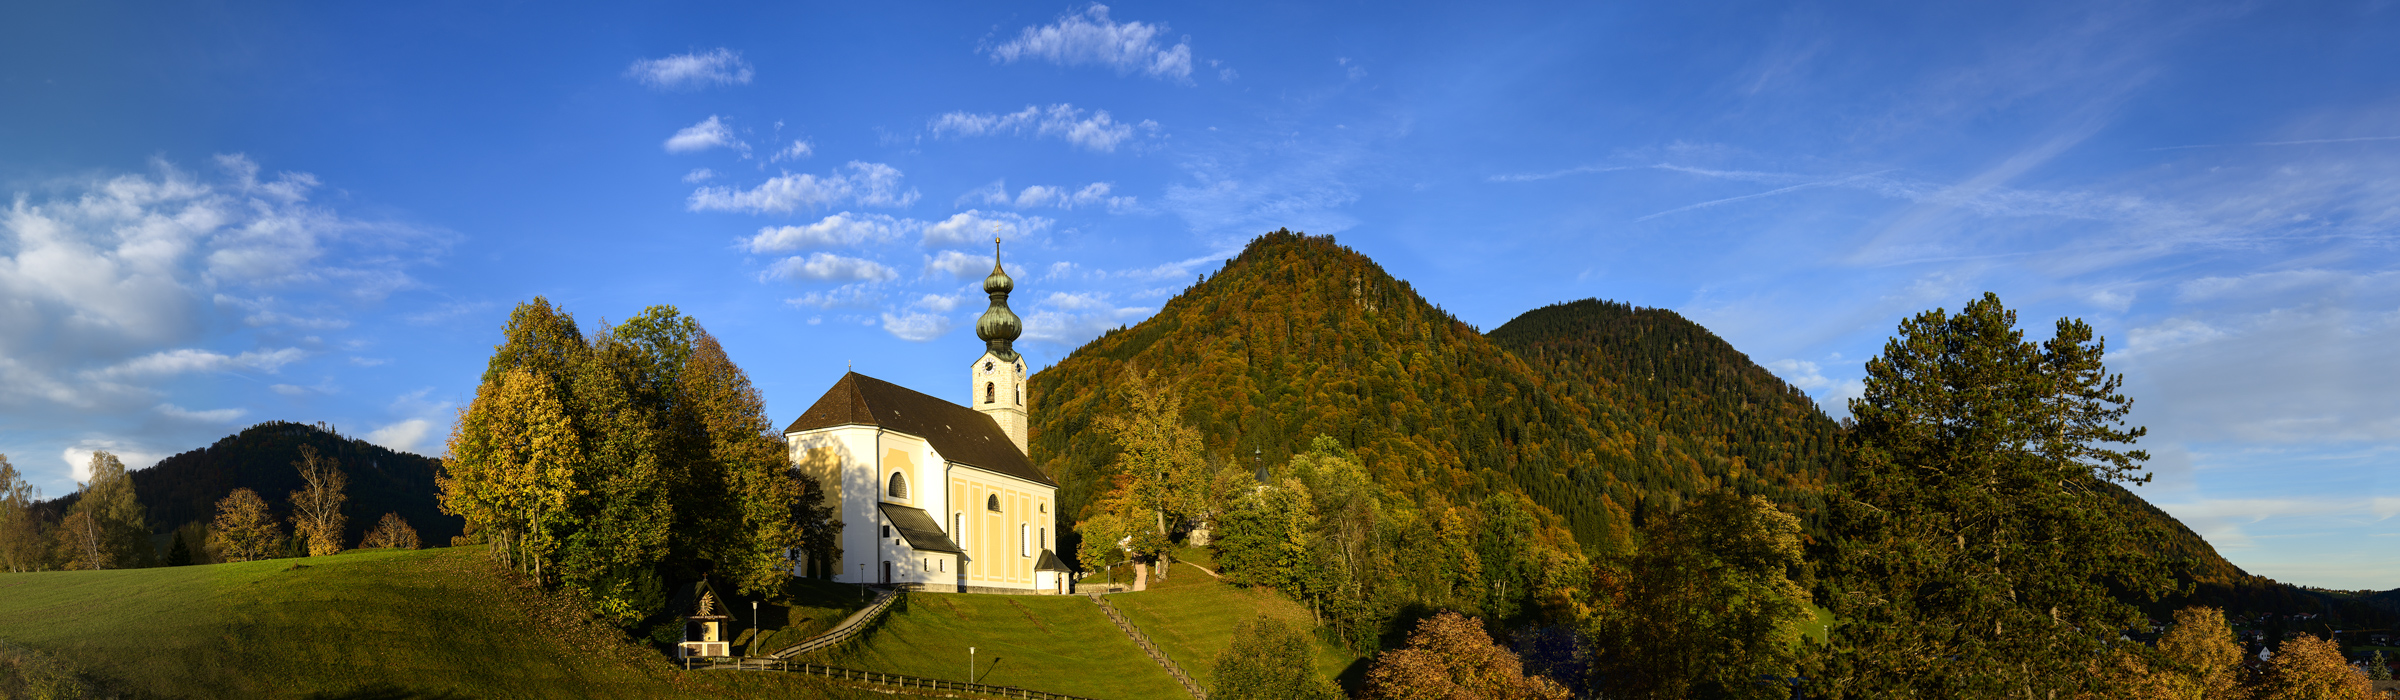 Indian Summer in Ruhpolding